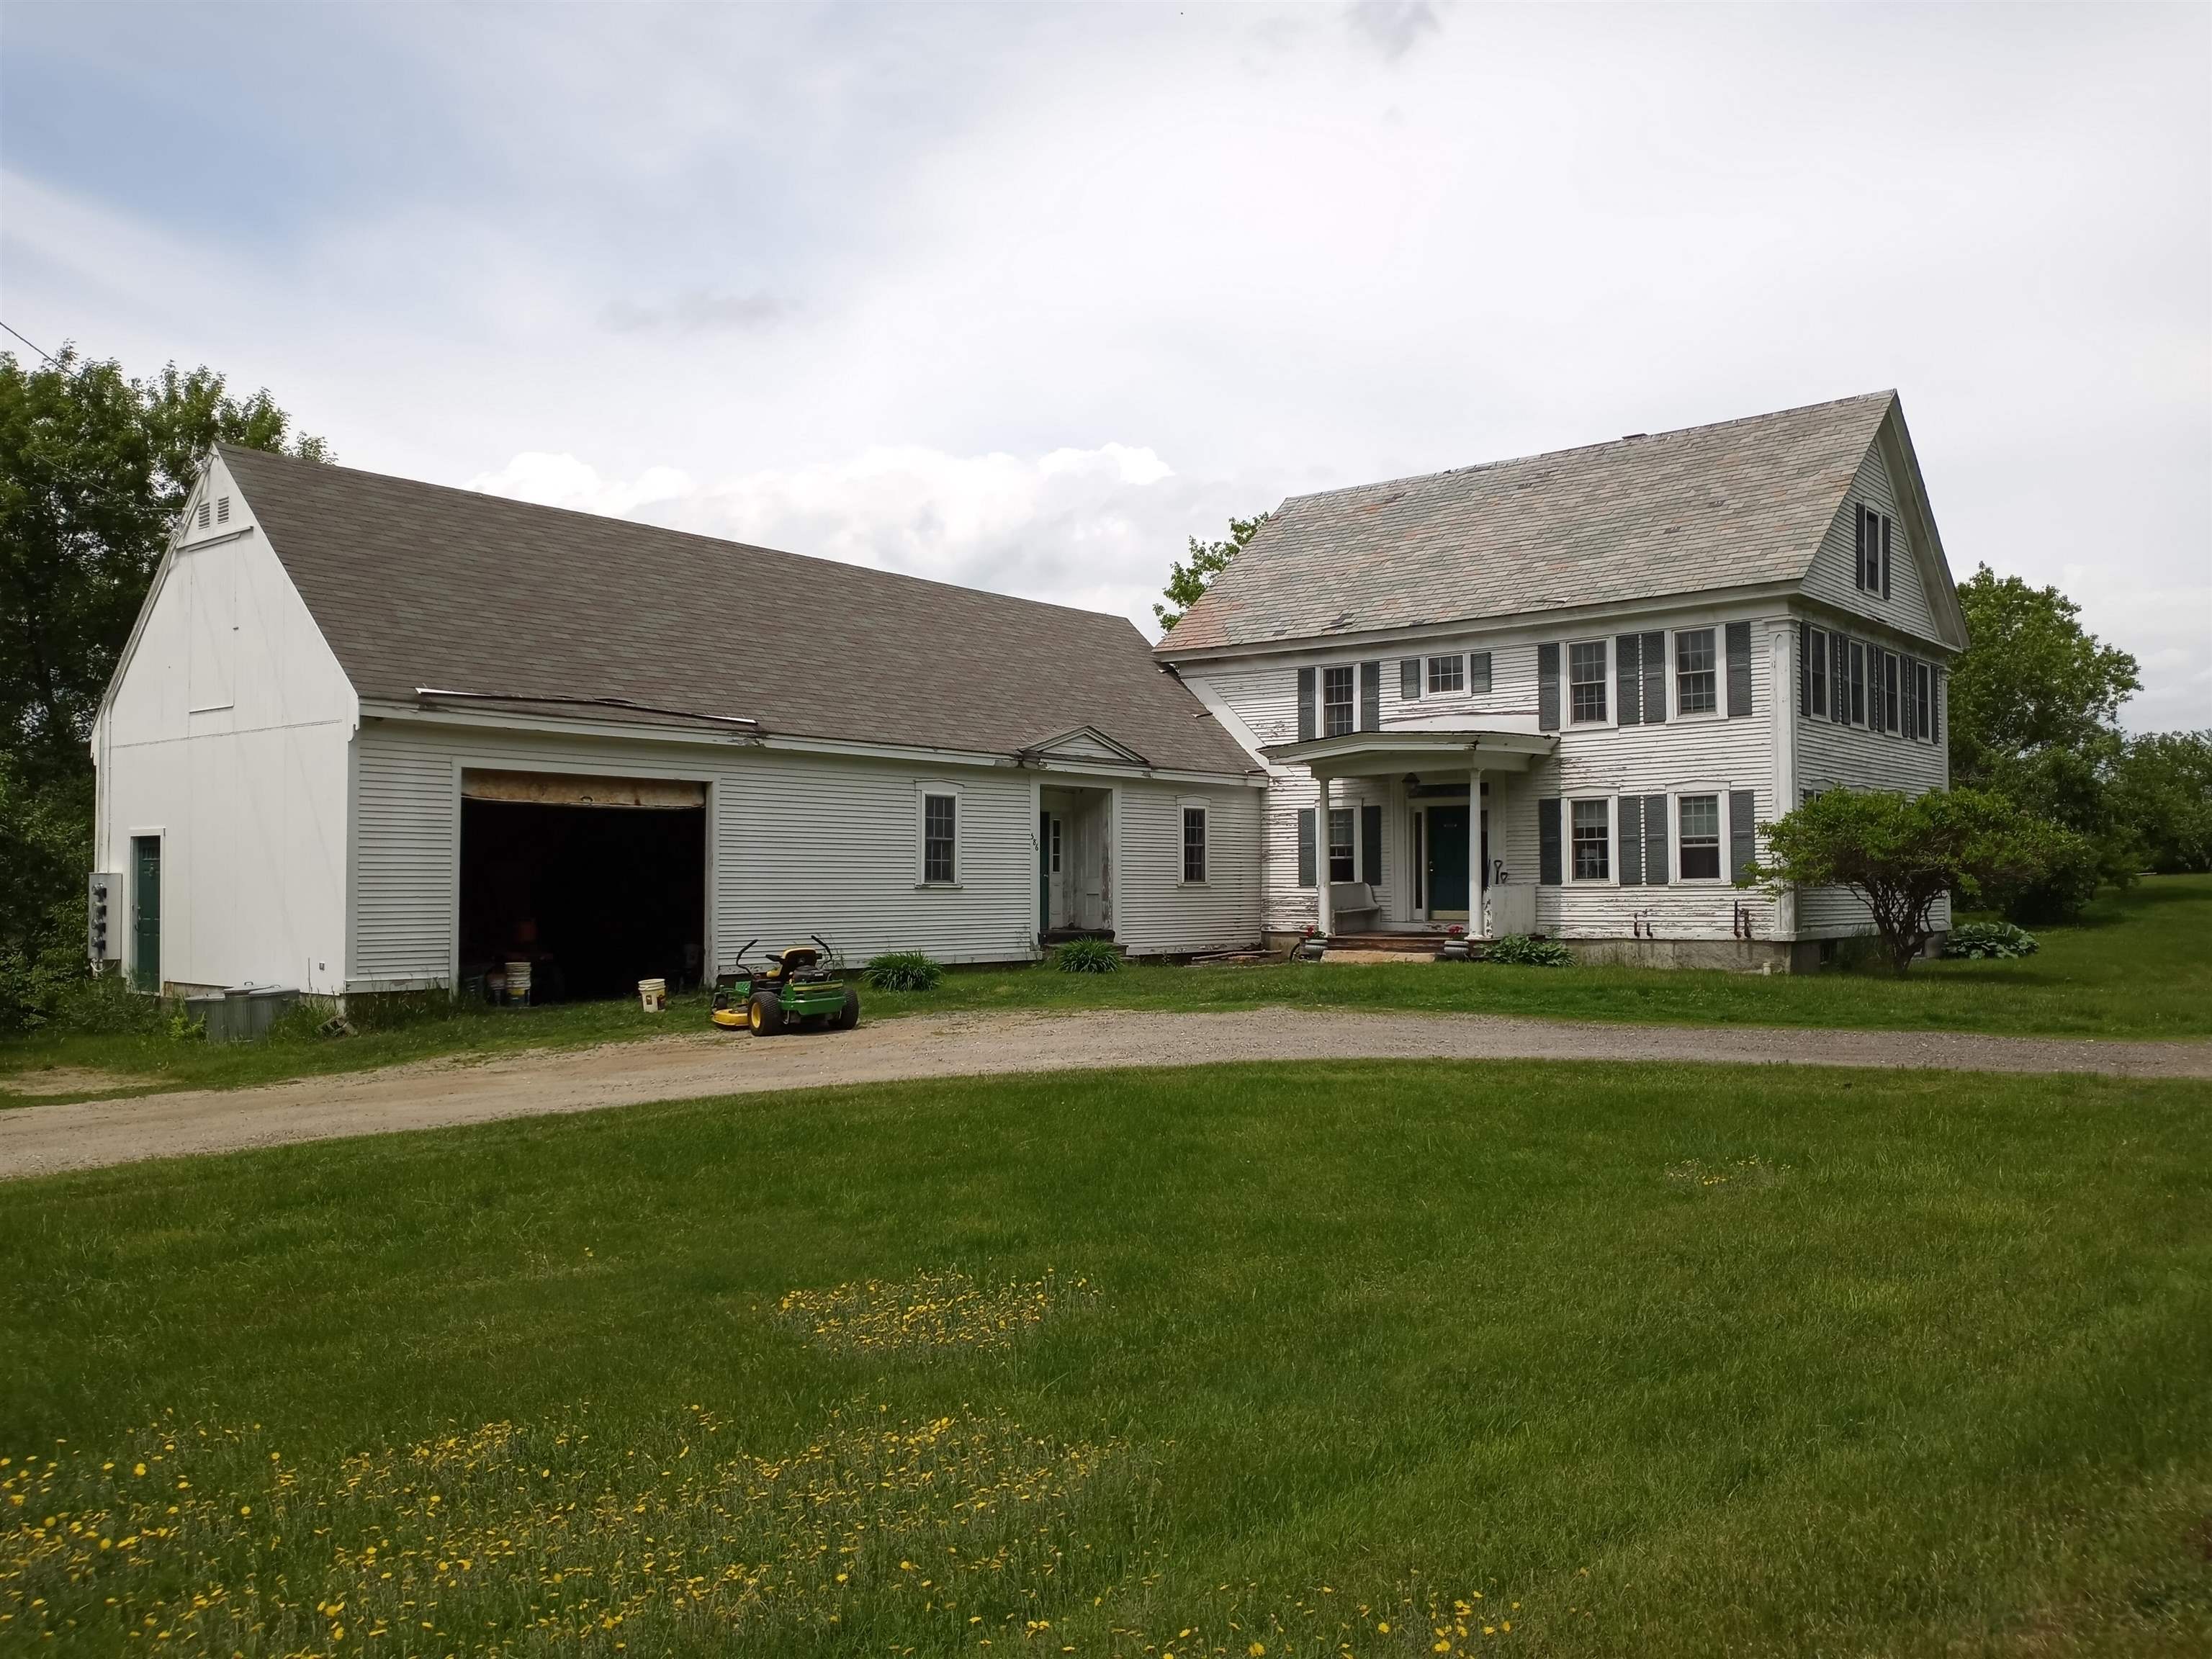 CHARLESTOWN NH Multi Family Homes for sale